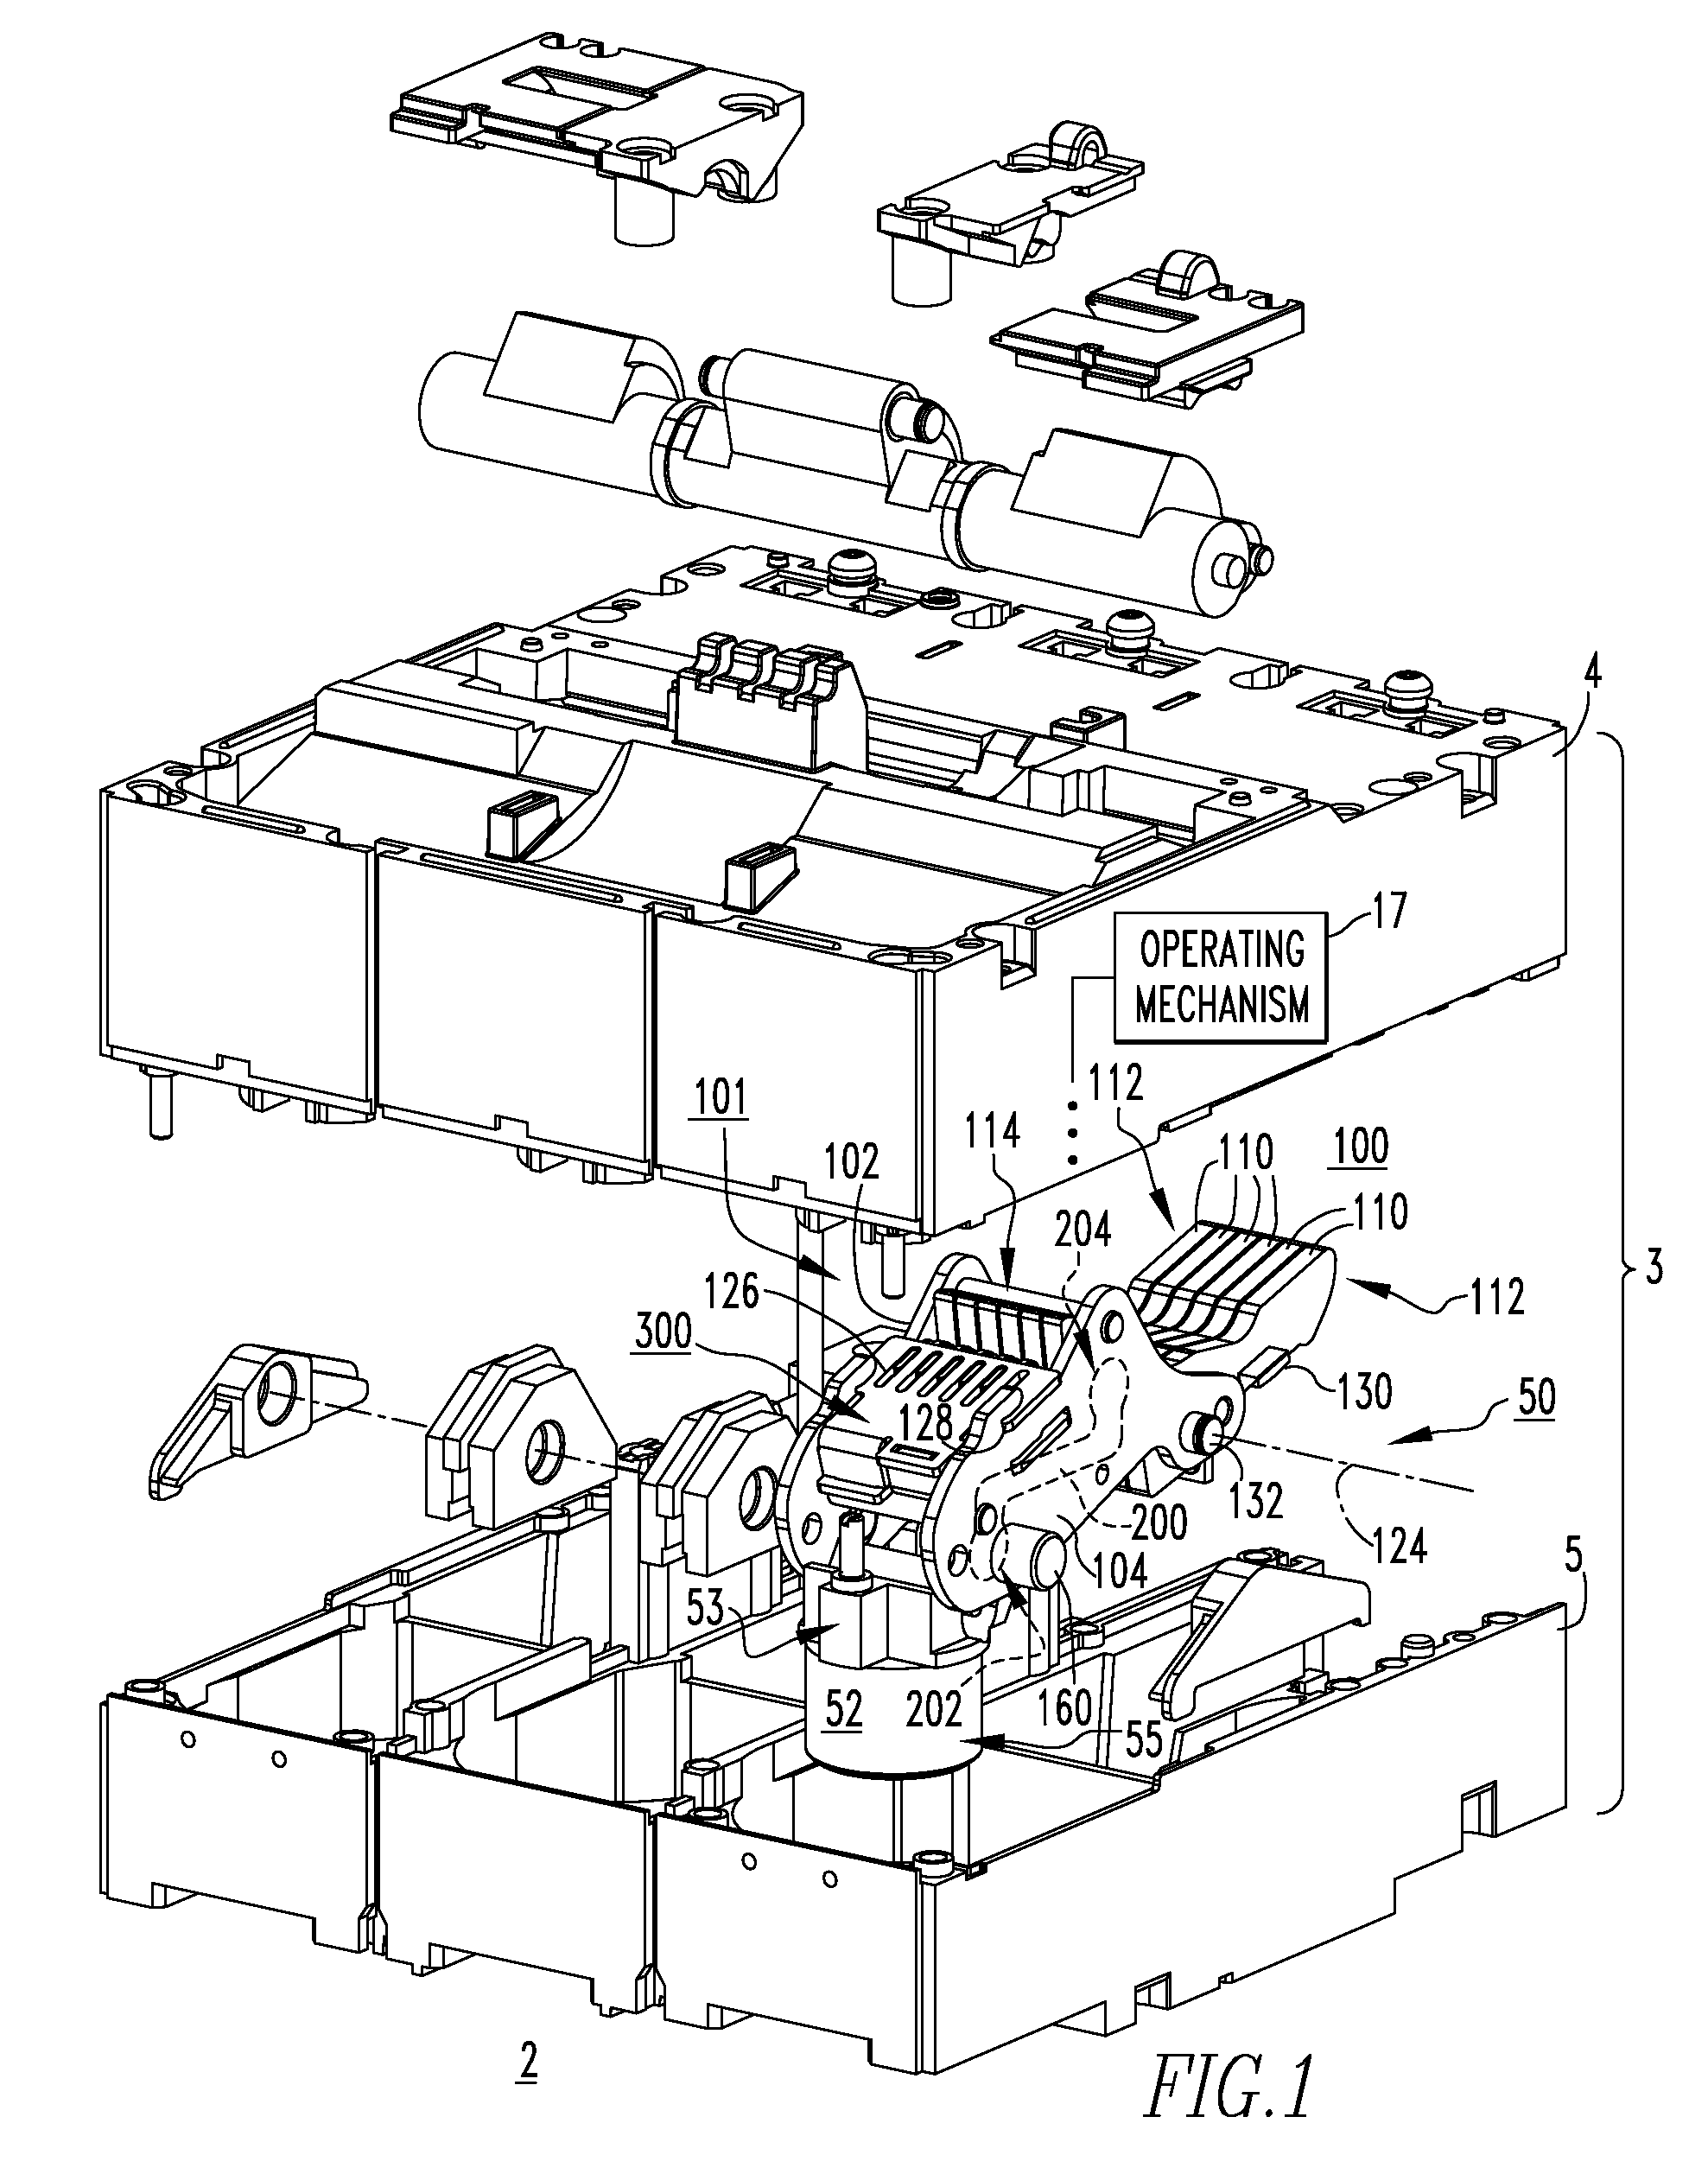 Electical switching apparatus, and movable contact assembly and contact spring assembly therefor